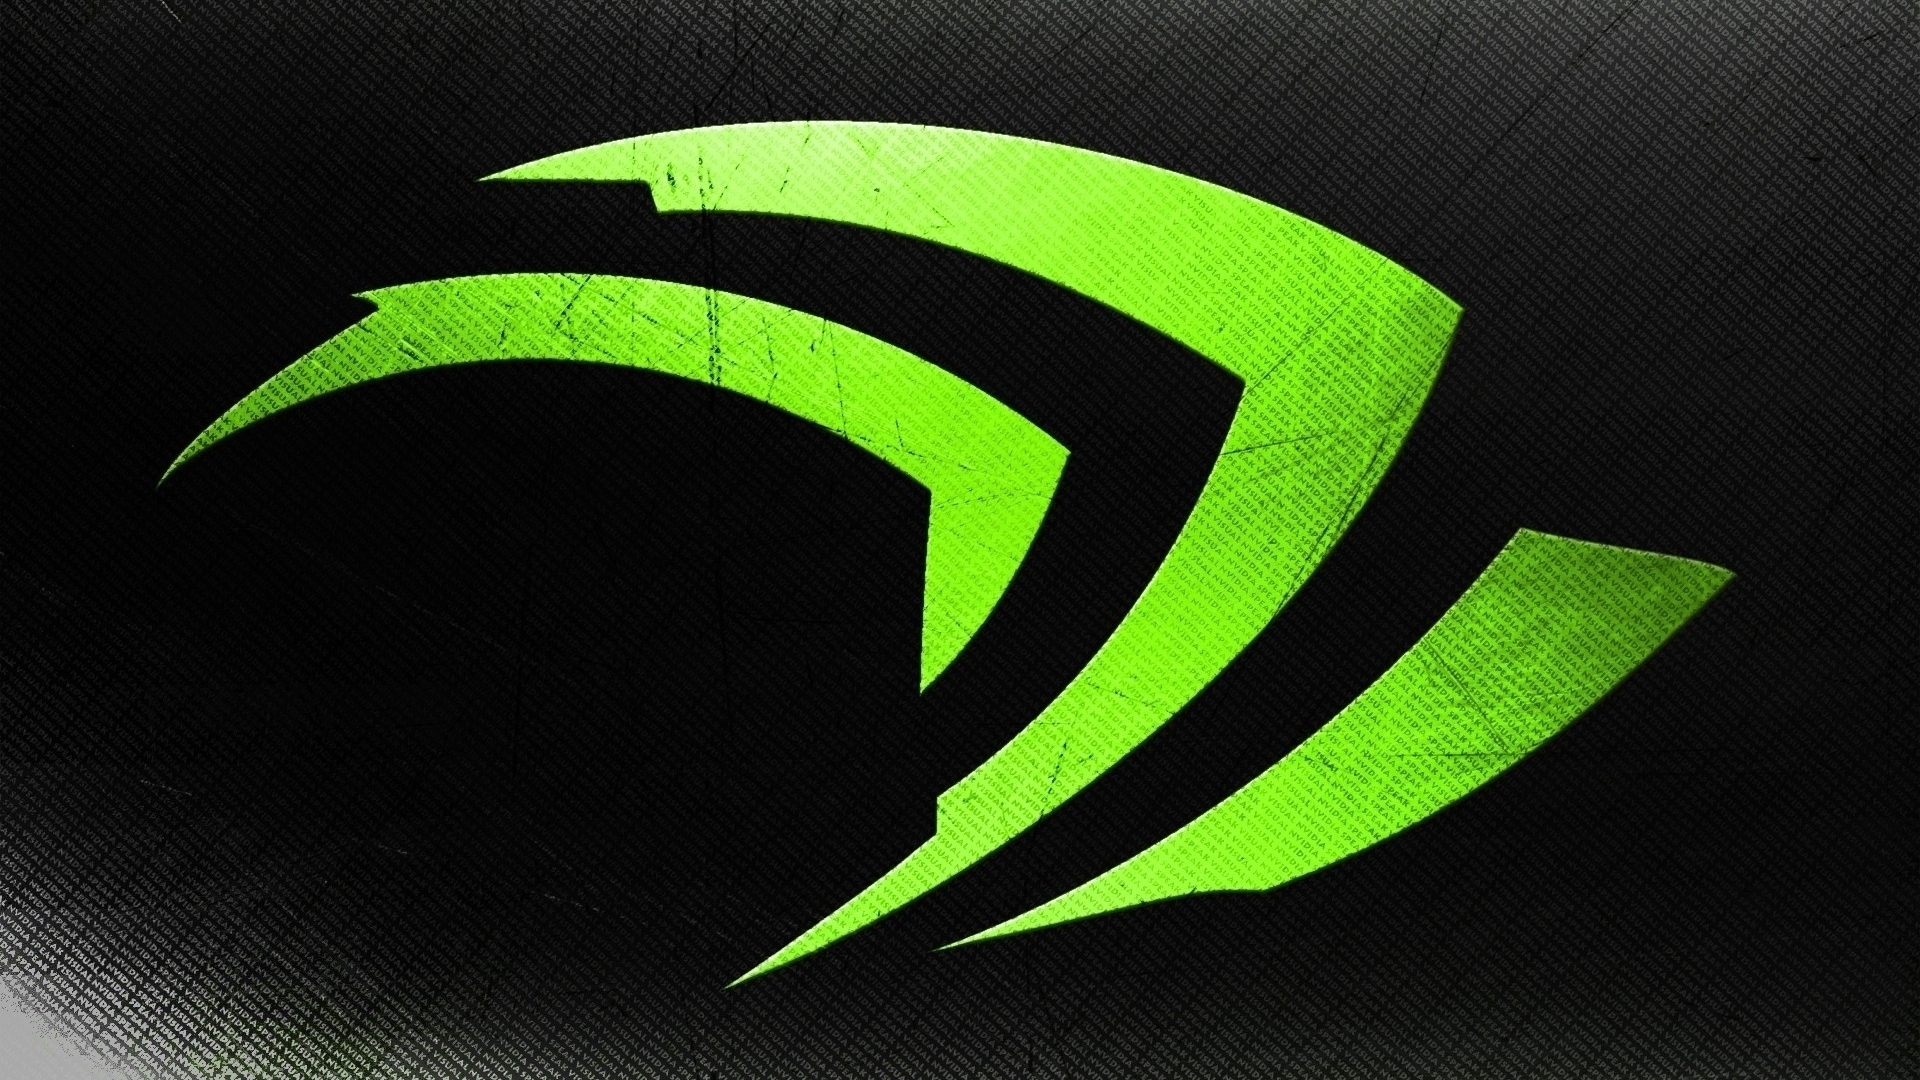 Cool Desktop Wallpapers with Nvidia Similar Logo in Black and ...